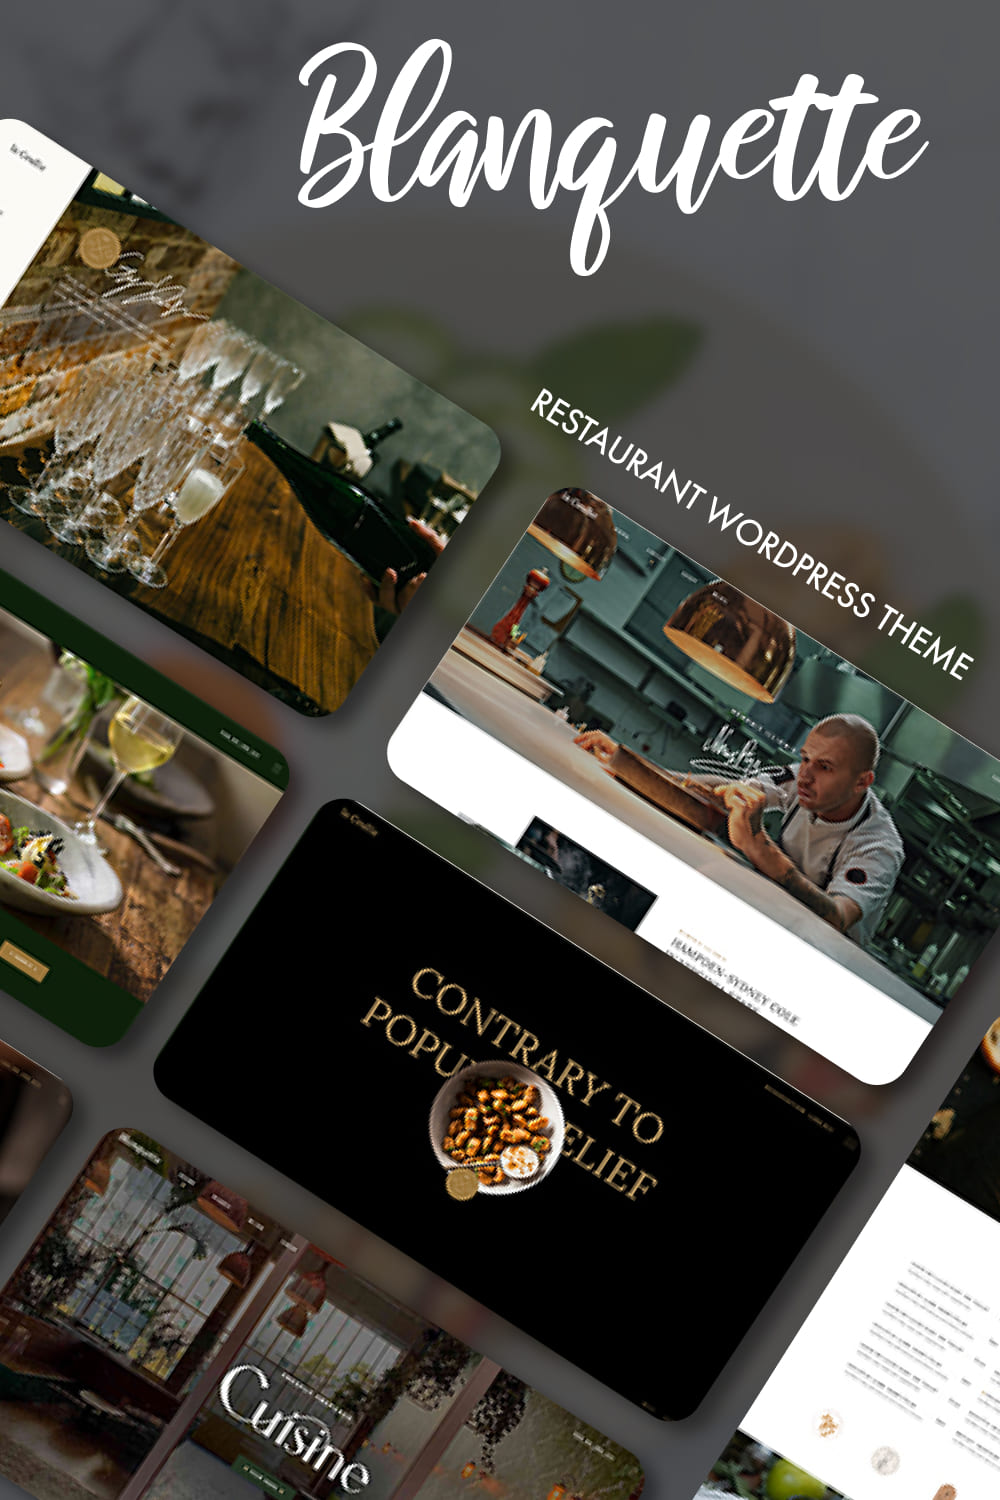 A selection of wonderful images of restaurant-themed WordPress pages.